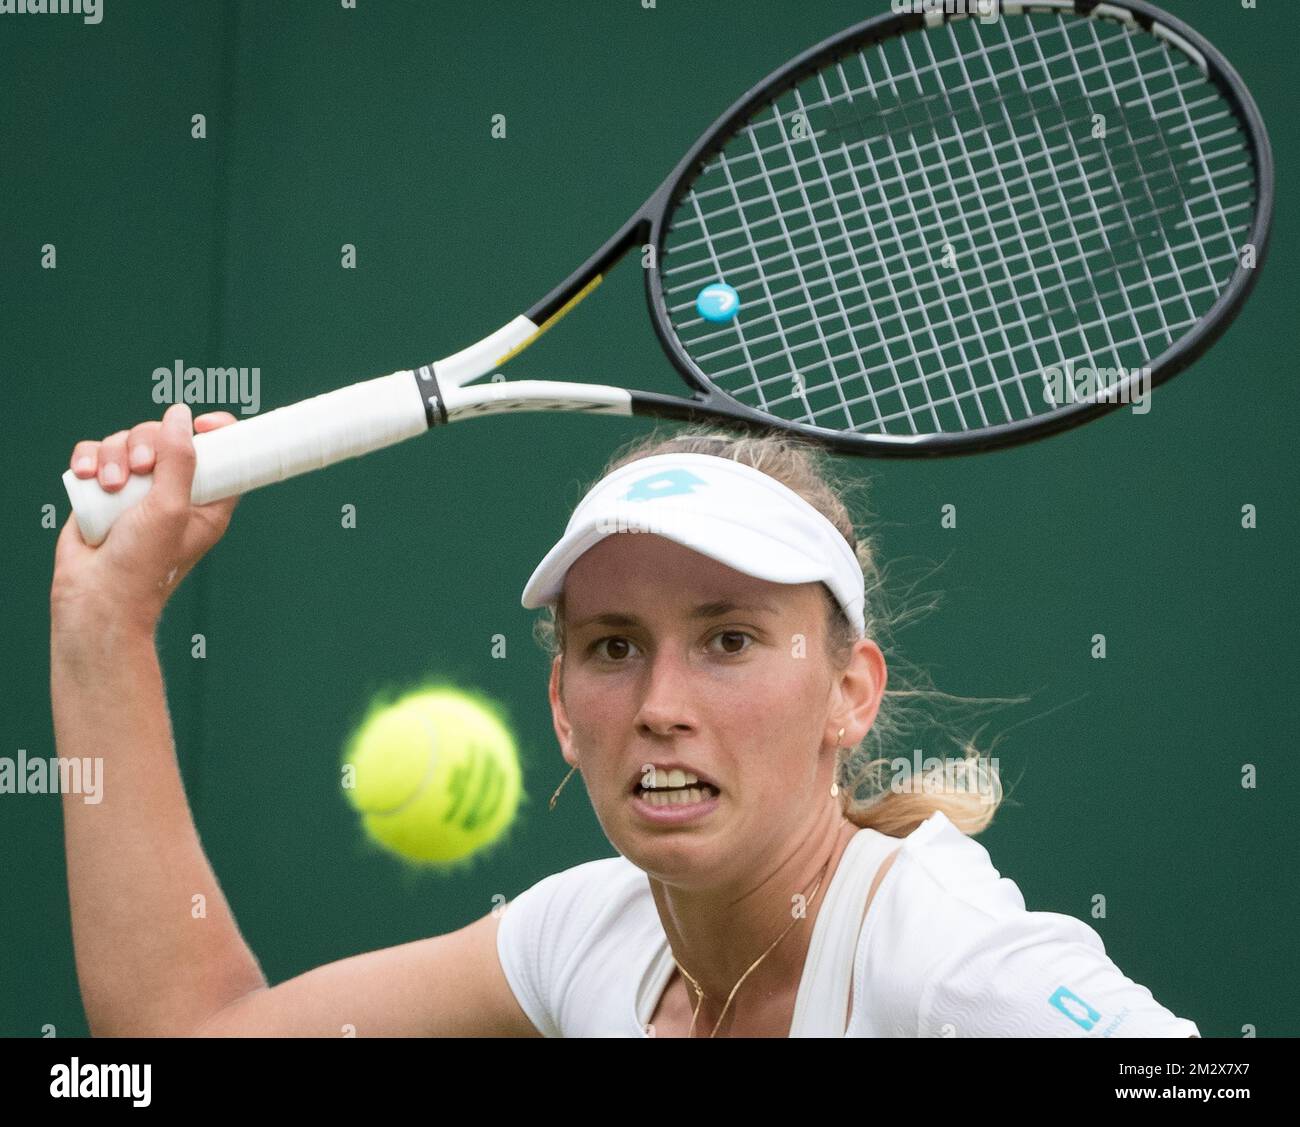 Belgian Elise Mertens (WTA 21) pictured in action during a tennis match against Chinese Wang Qiang (WTA 15) in the third round of the women's singles at the 2019 Wimbledon grand slam tennis tournament at the All England Tennis Club, in south-west London, Britain, Saturday 06 July 2019. BELGA PHOTO BENOIT DOPPAGNE Stock Photo